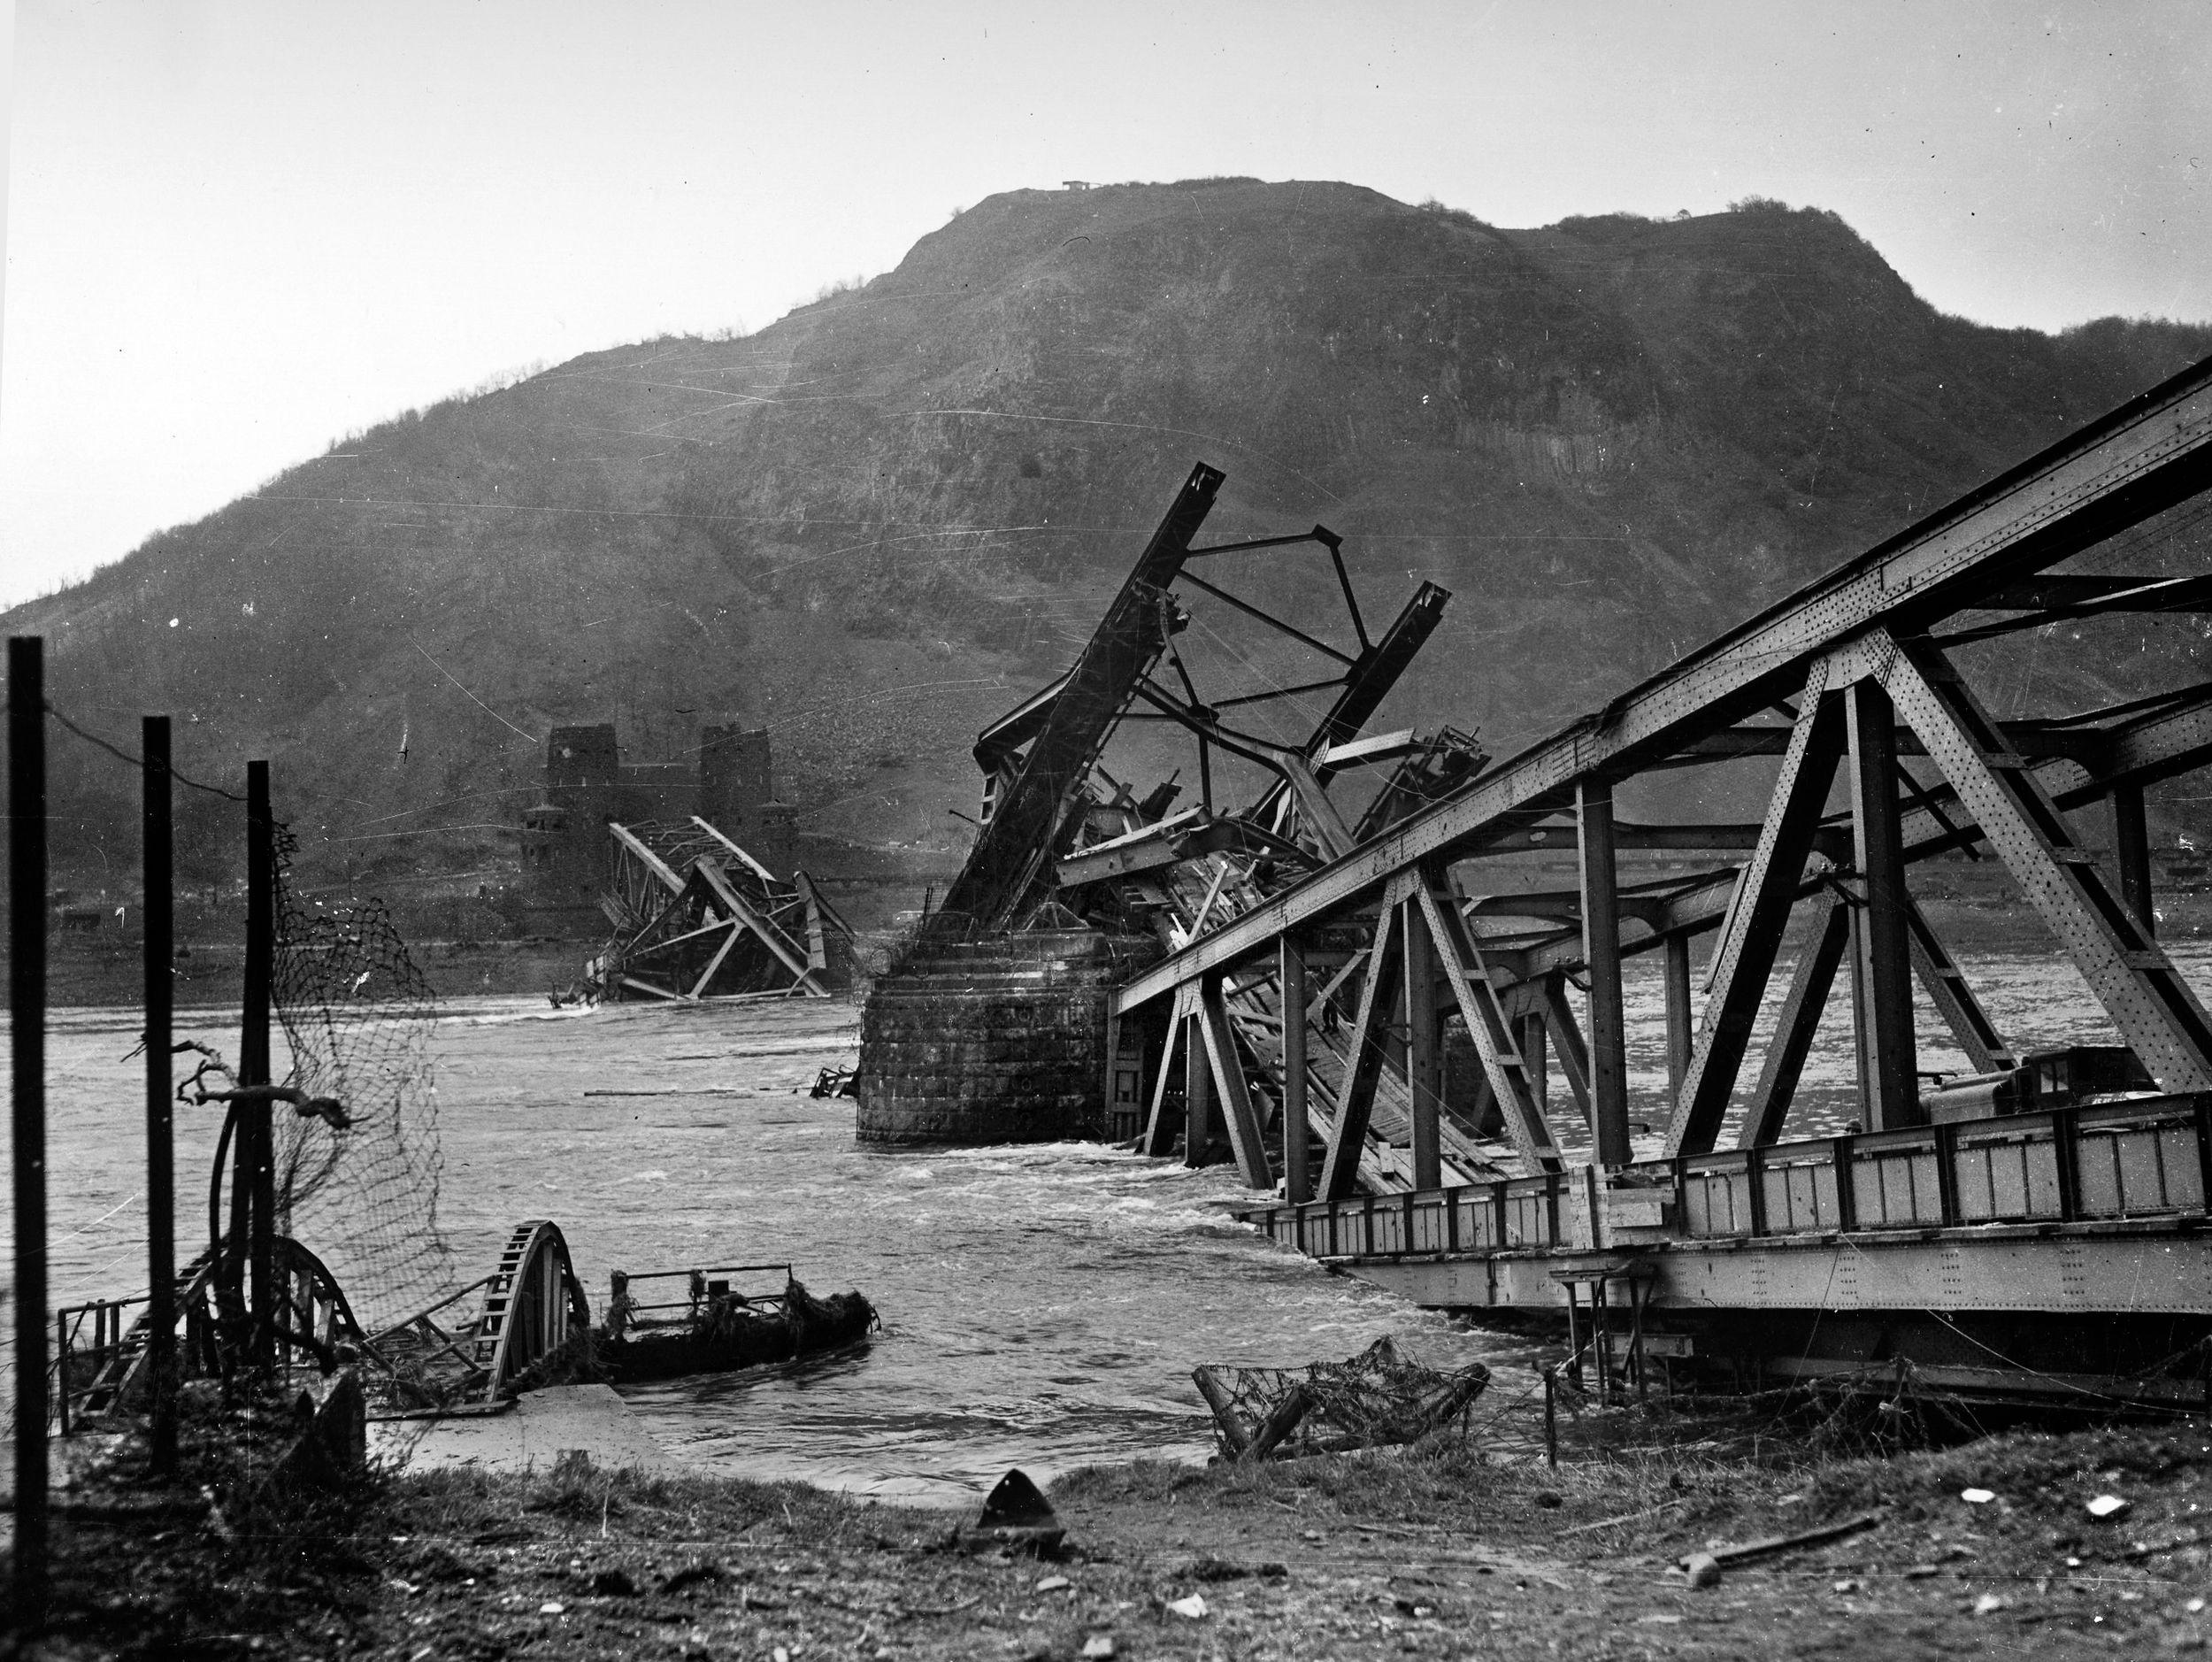 American engineers attempted to shore up the Ludendorff bridge while pushing across as many troops as possible. Attacks by German aircraft and V-2 rockets, in addition to the damage from the initial demolition attempt, finally caused the bridge to collapse on March 17. Six soldiers from the 276th Engineer Combat Battalion died; 11 were missing and presumed drowned; 60 were injured, and three later succumbed to their injuries. 